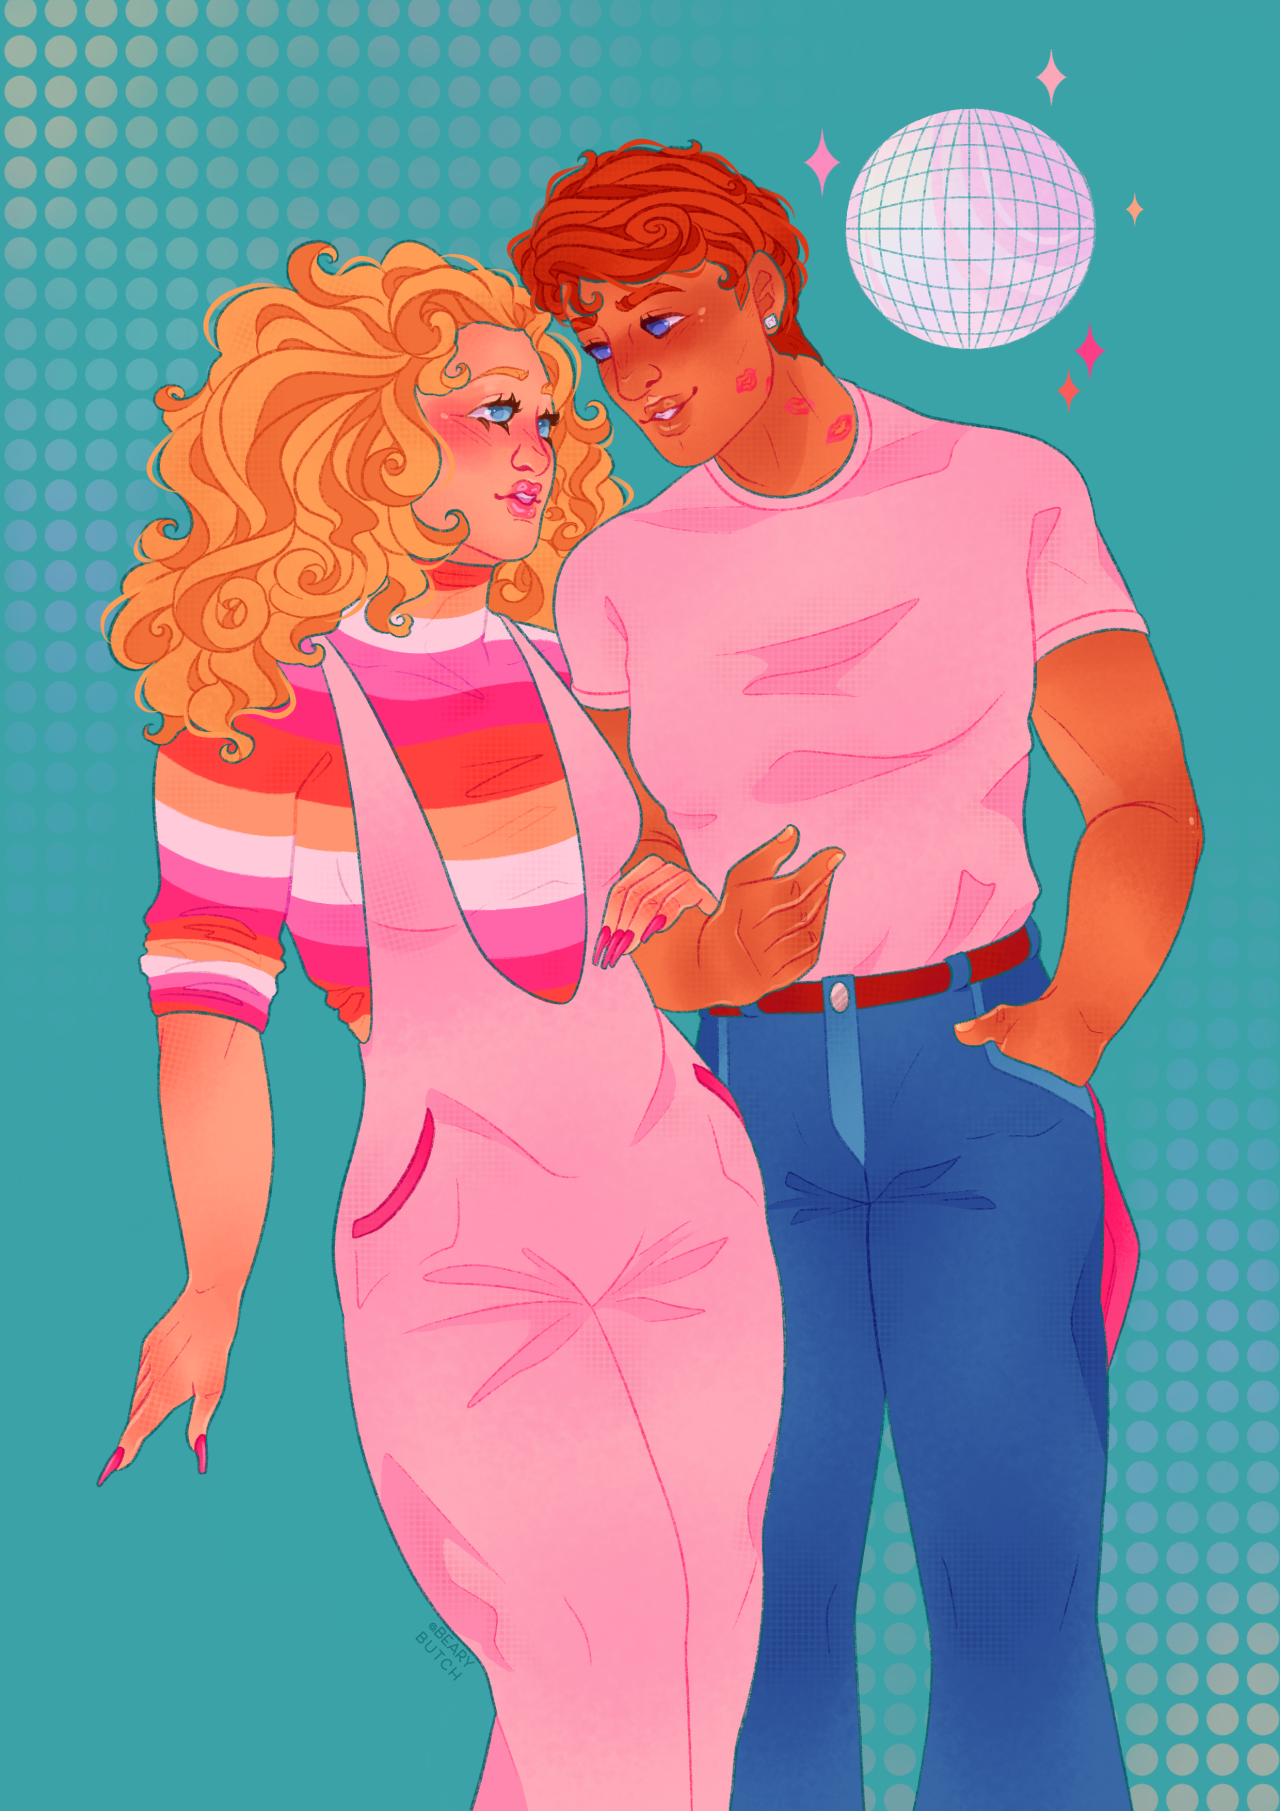 Teddy barbie and kenпїЅbut make them butch n femme! image... picture